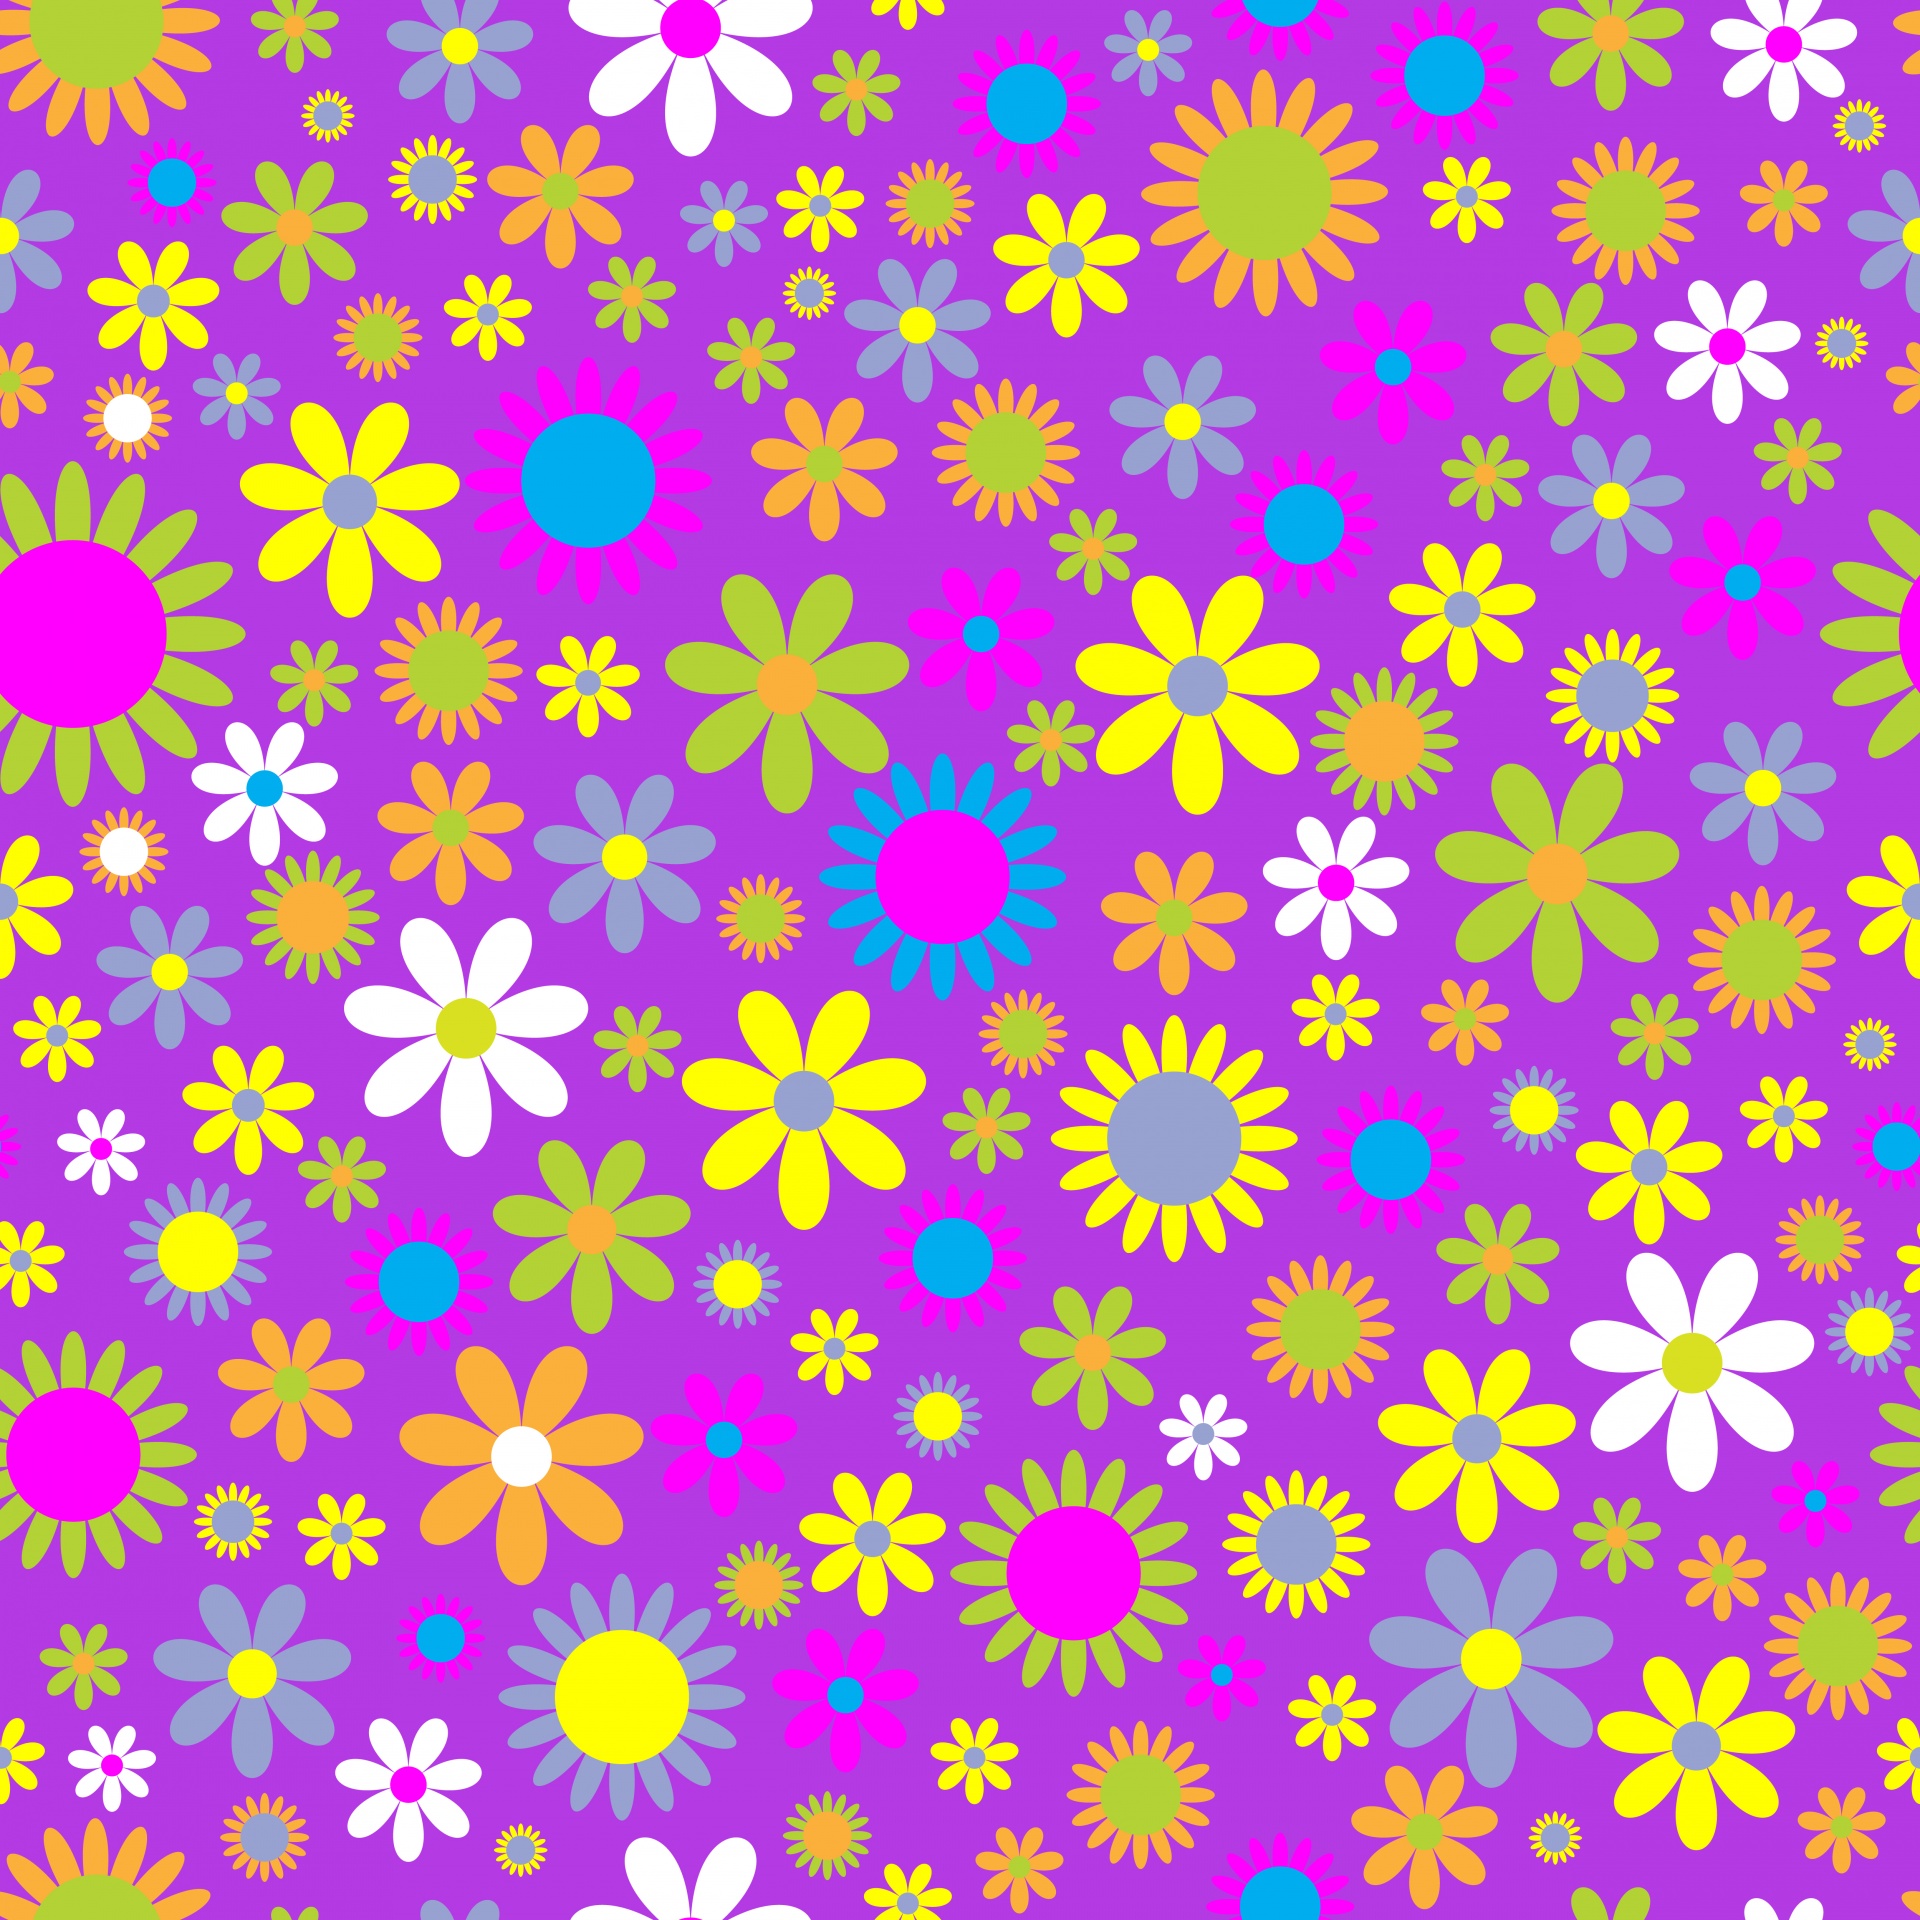 floral-background-wallpaper-pattern-free-stock-photo-public-domain